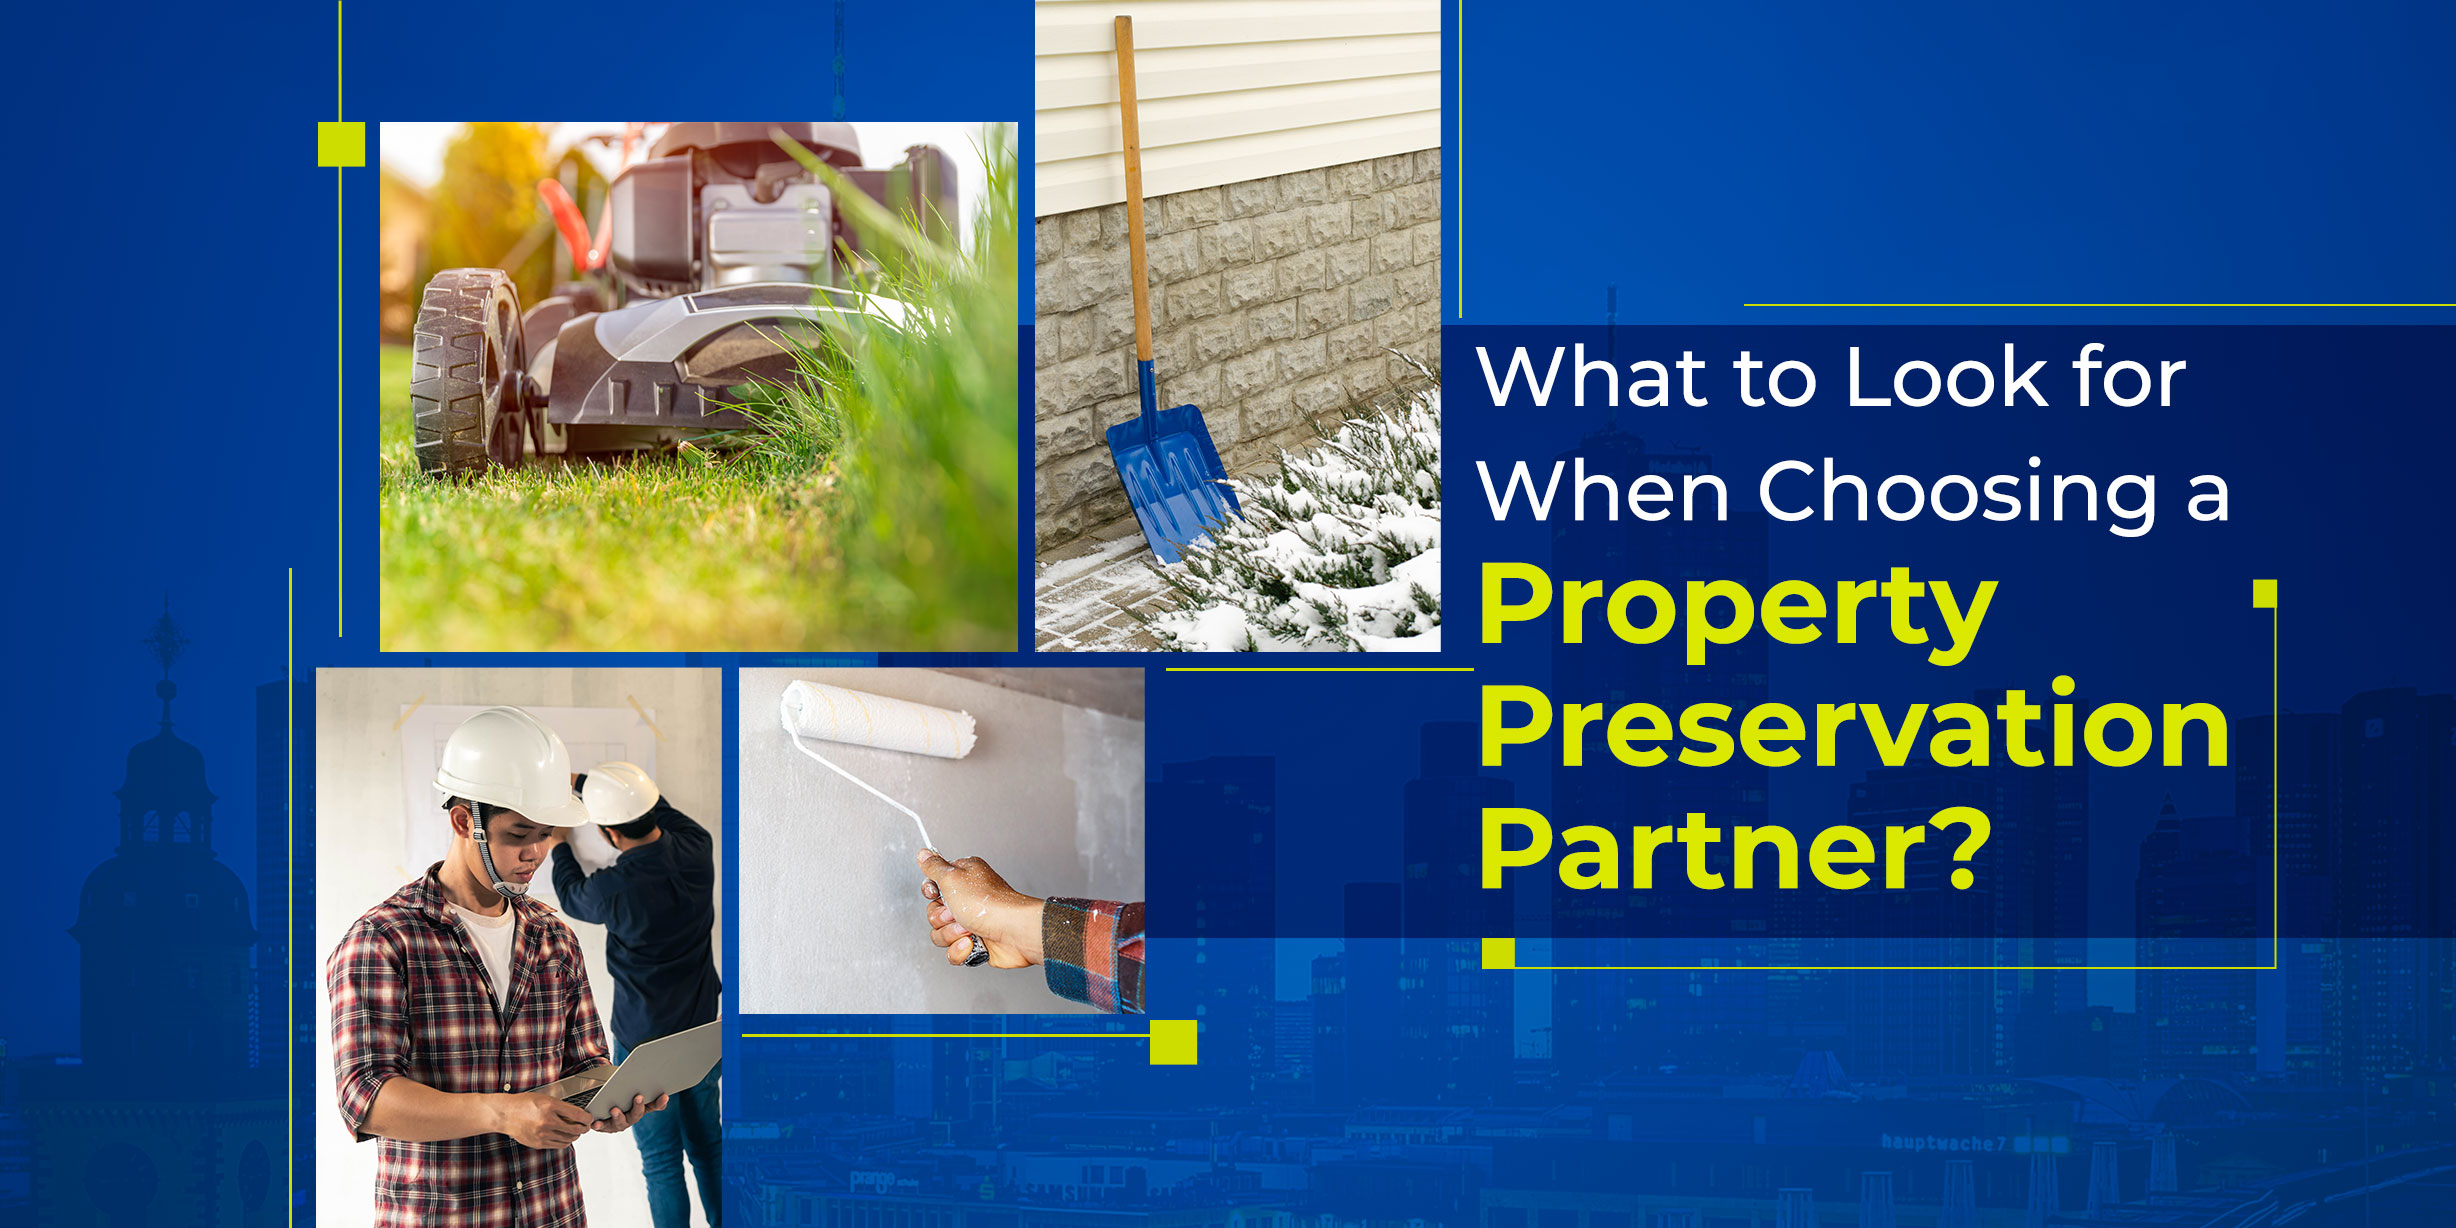 What to Look for When Choosing a Property Preservation Partner?